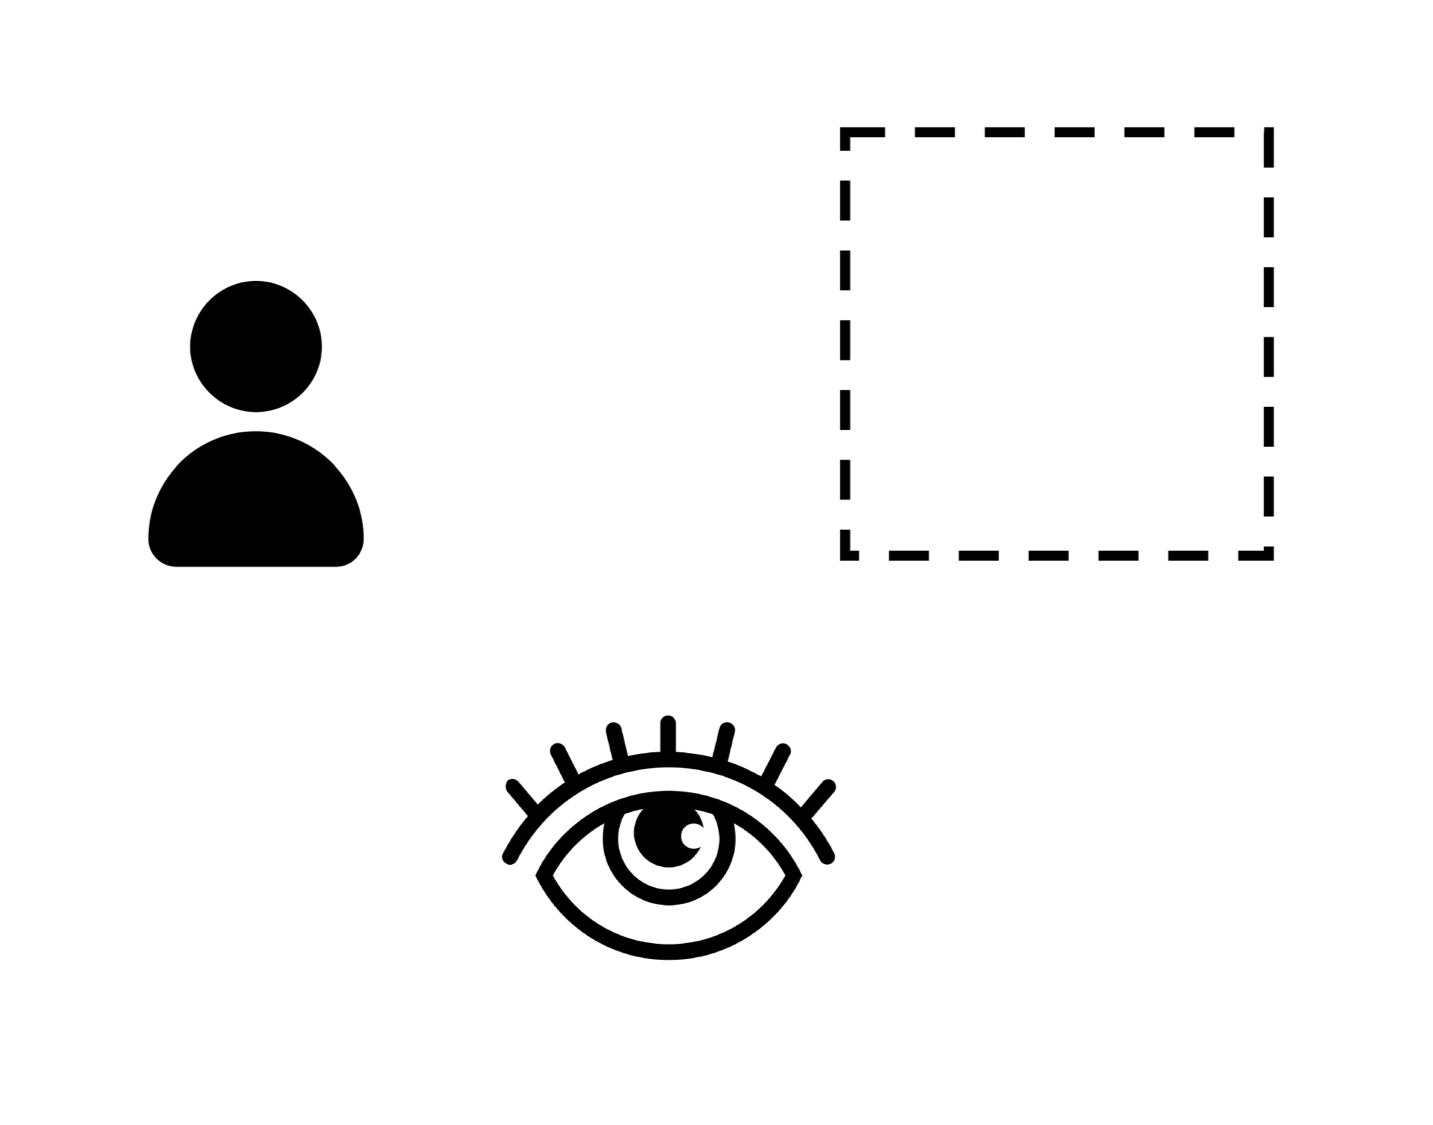 The original image - an icon of a person, a square and an eye